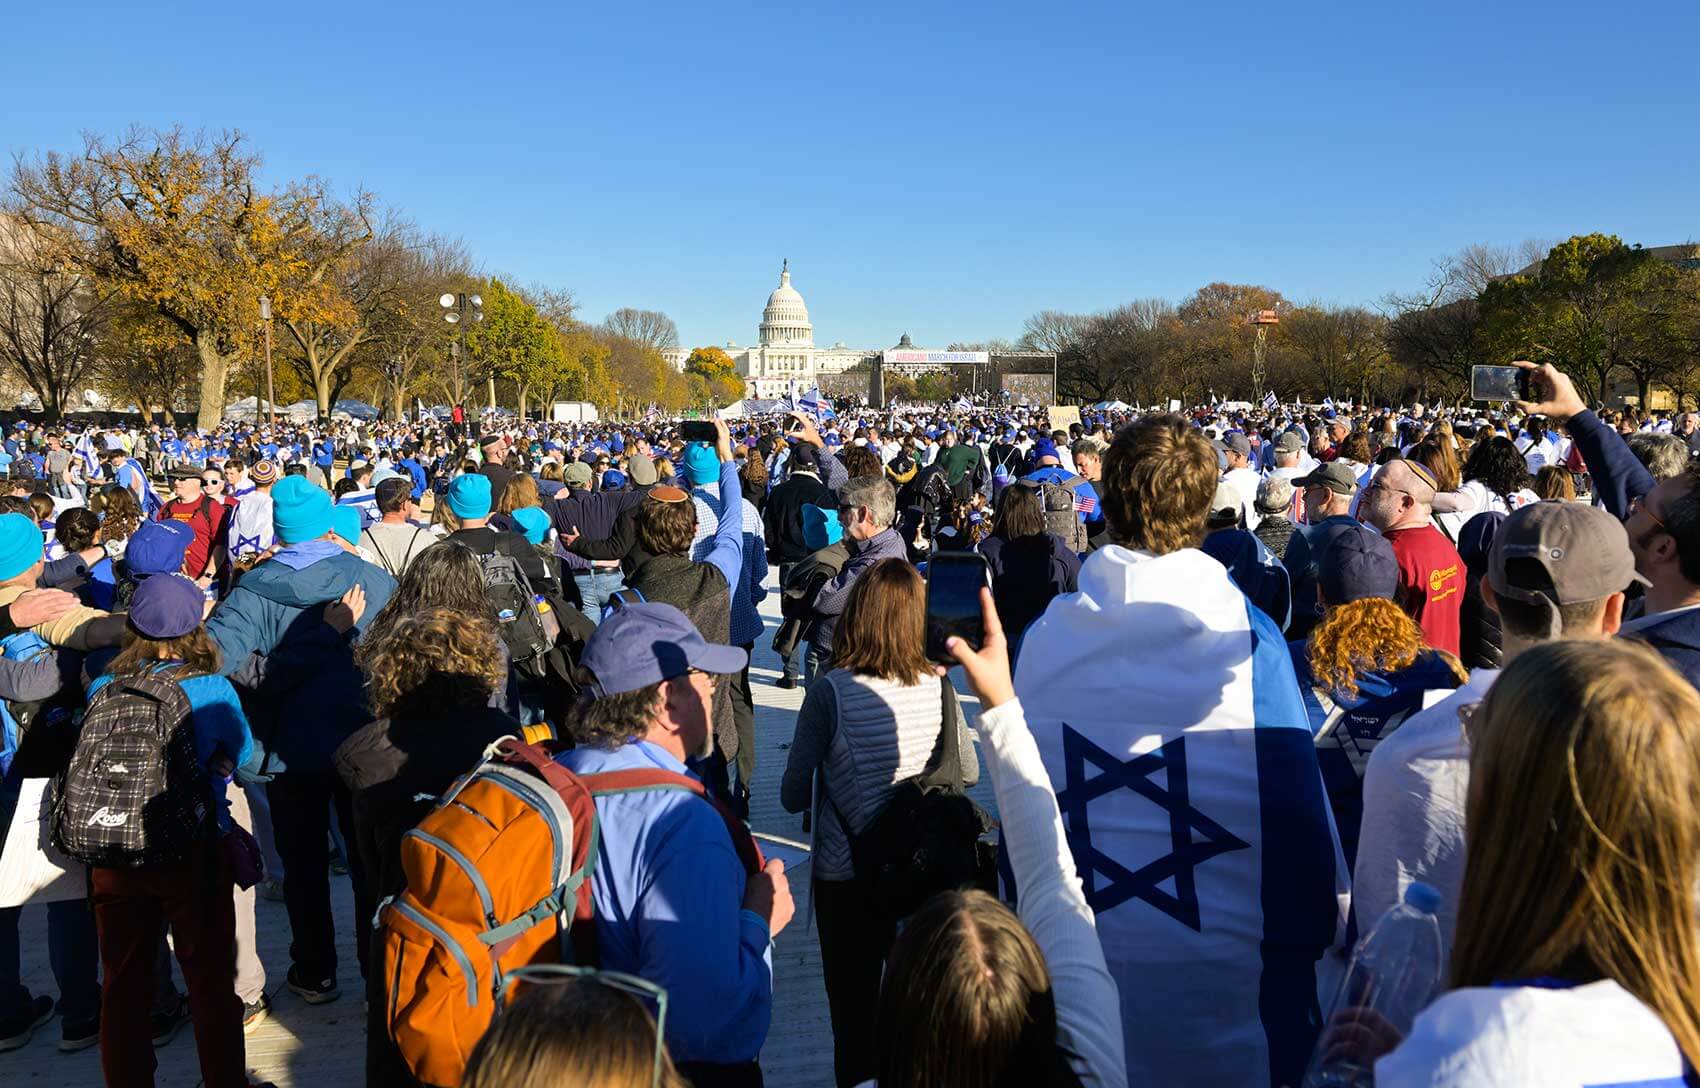 Crowd at March for Israel in Washington DC